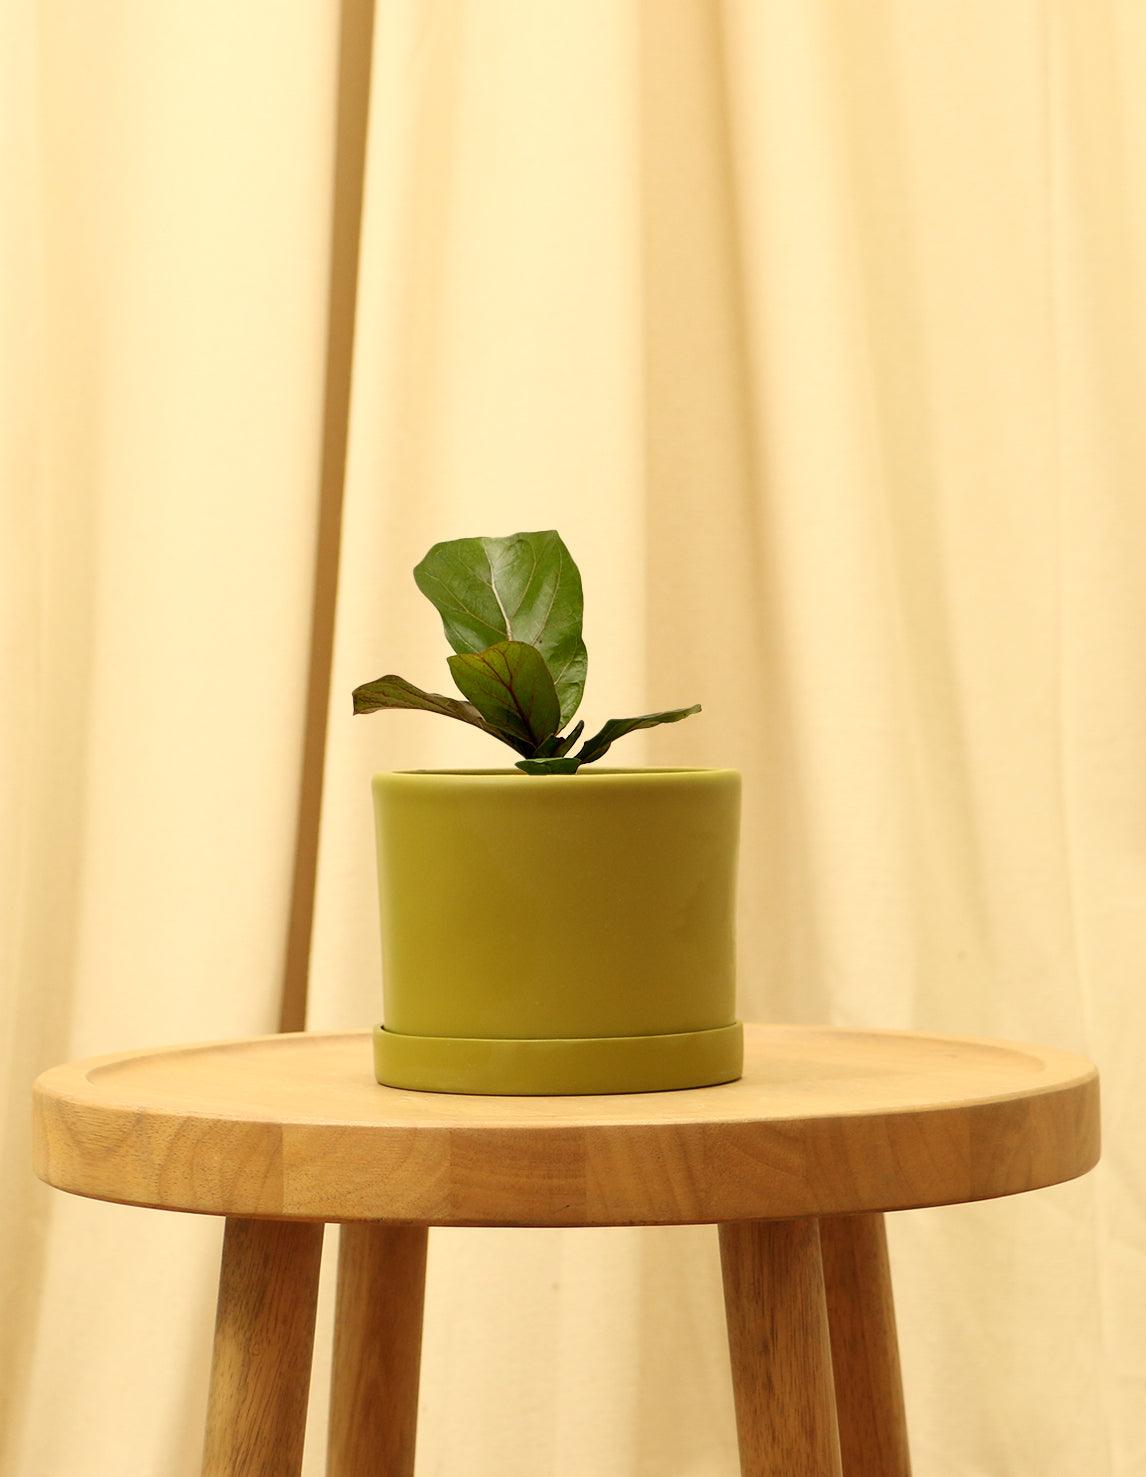 Small Fiddle Leaf Fig Tree in green pot.